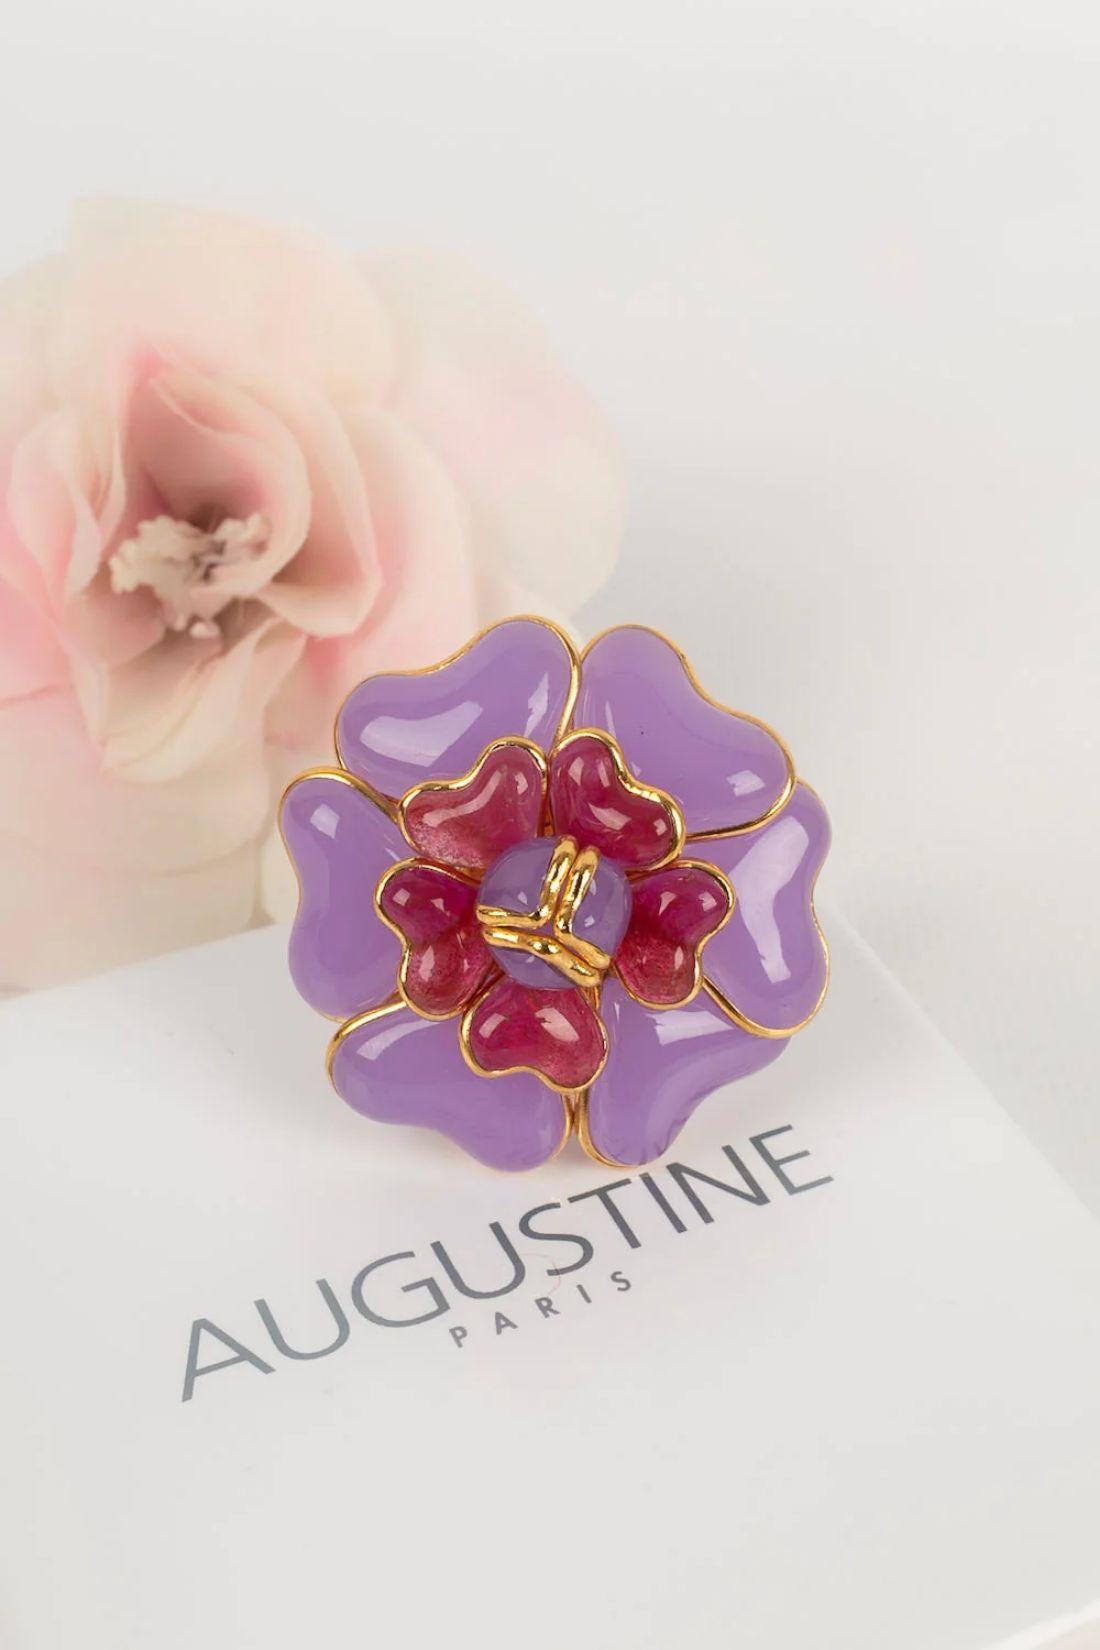 Augustine - (Made in France) Gold plated metal and glass paste ring. Adjustable size.

Additional information:
Diameter of the camellia : 5 cm

Condition: 
Very good condition

With her expertise in vintage fashion, Isabelle Klein presents you with